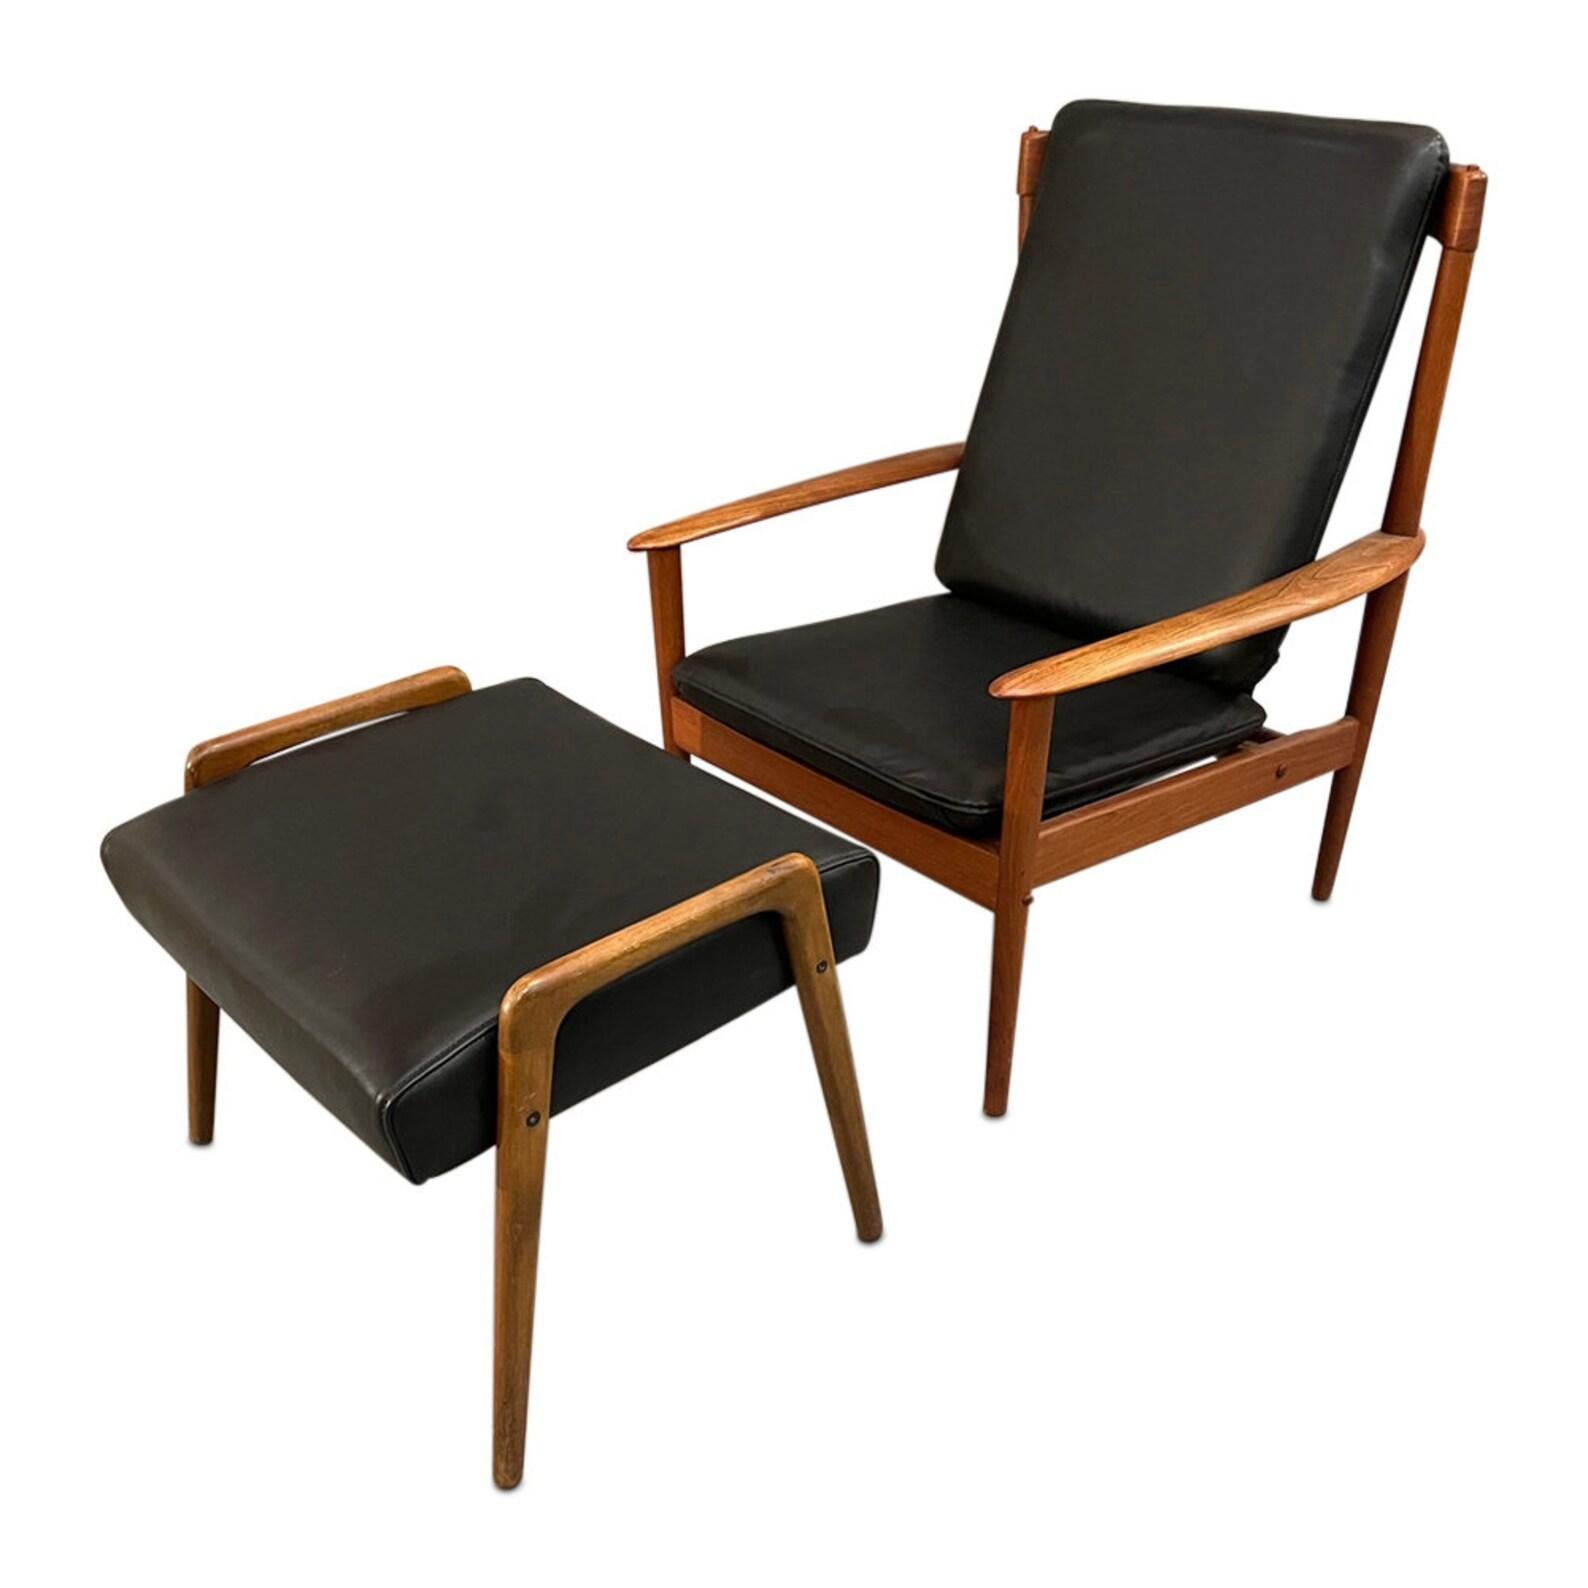 Completely restored Lounge chair model PJ 56 + ottoman. Designed in 1956. 
Teak wood with new black leather cushions. 

dimensions chair: 
Arm to Arm W28 inches 
Depth 32” inches 
High back 36 inches 
Seat height: 15 inches 
Arms height: